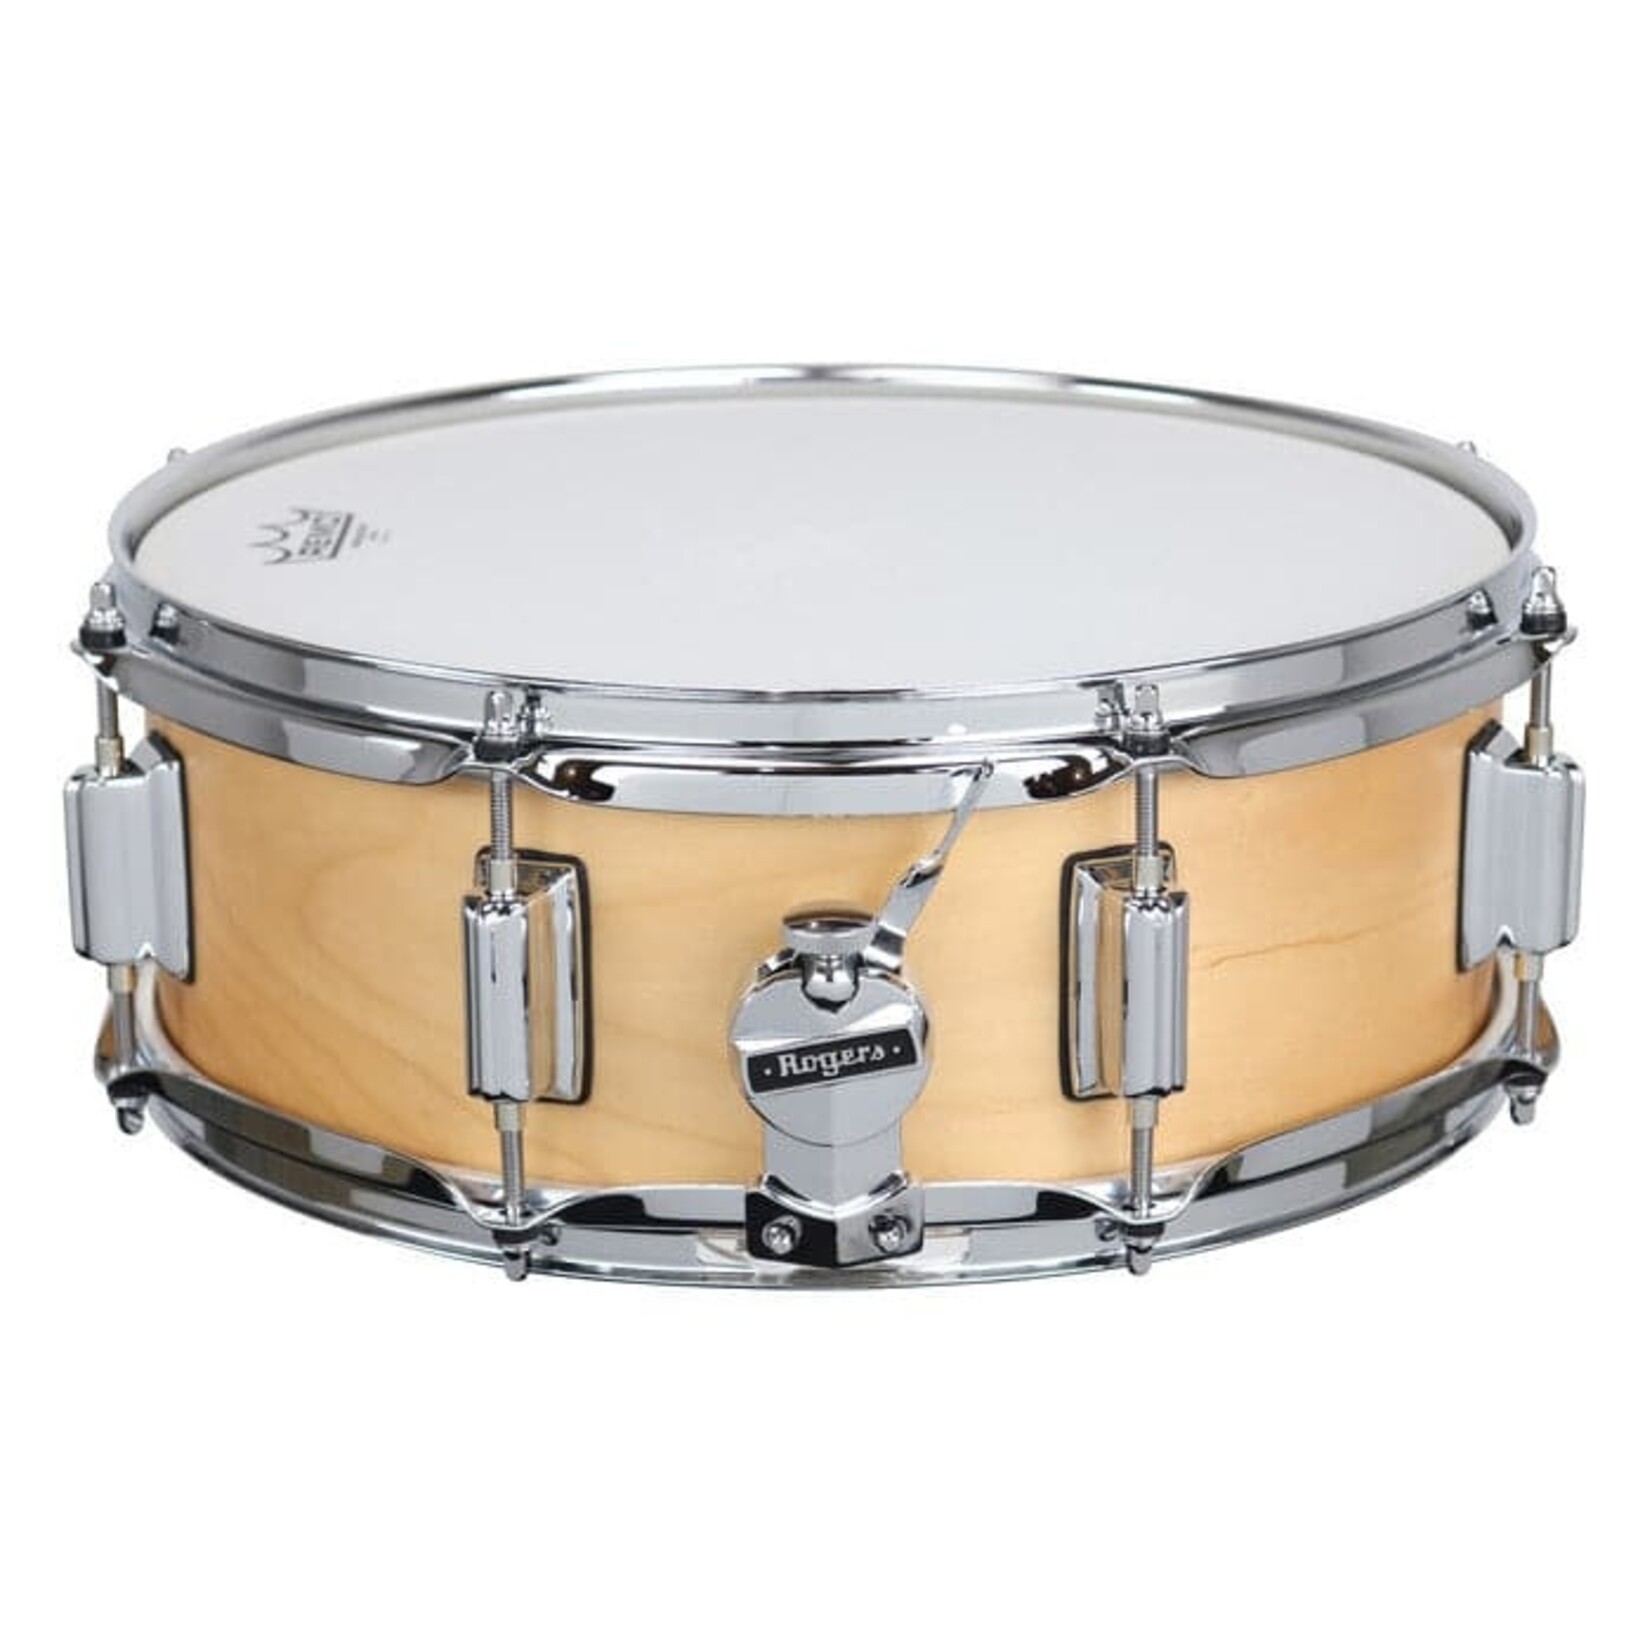 Rogers Rogers 5x14" Powertone Snare Drum (Satin Natural) 24SN